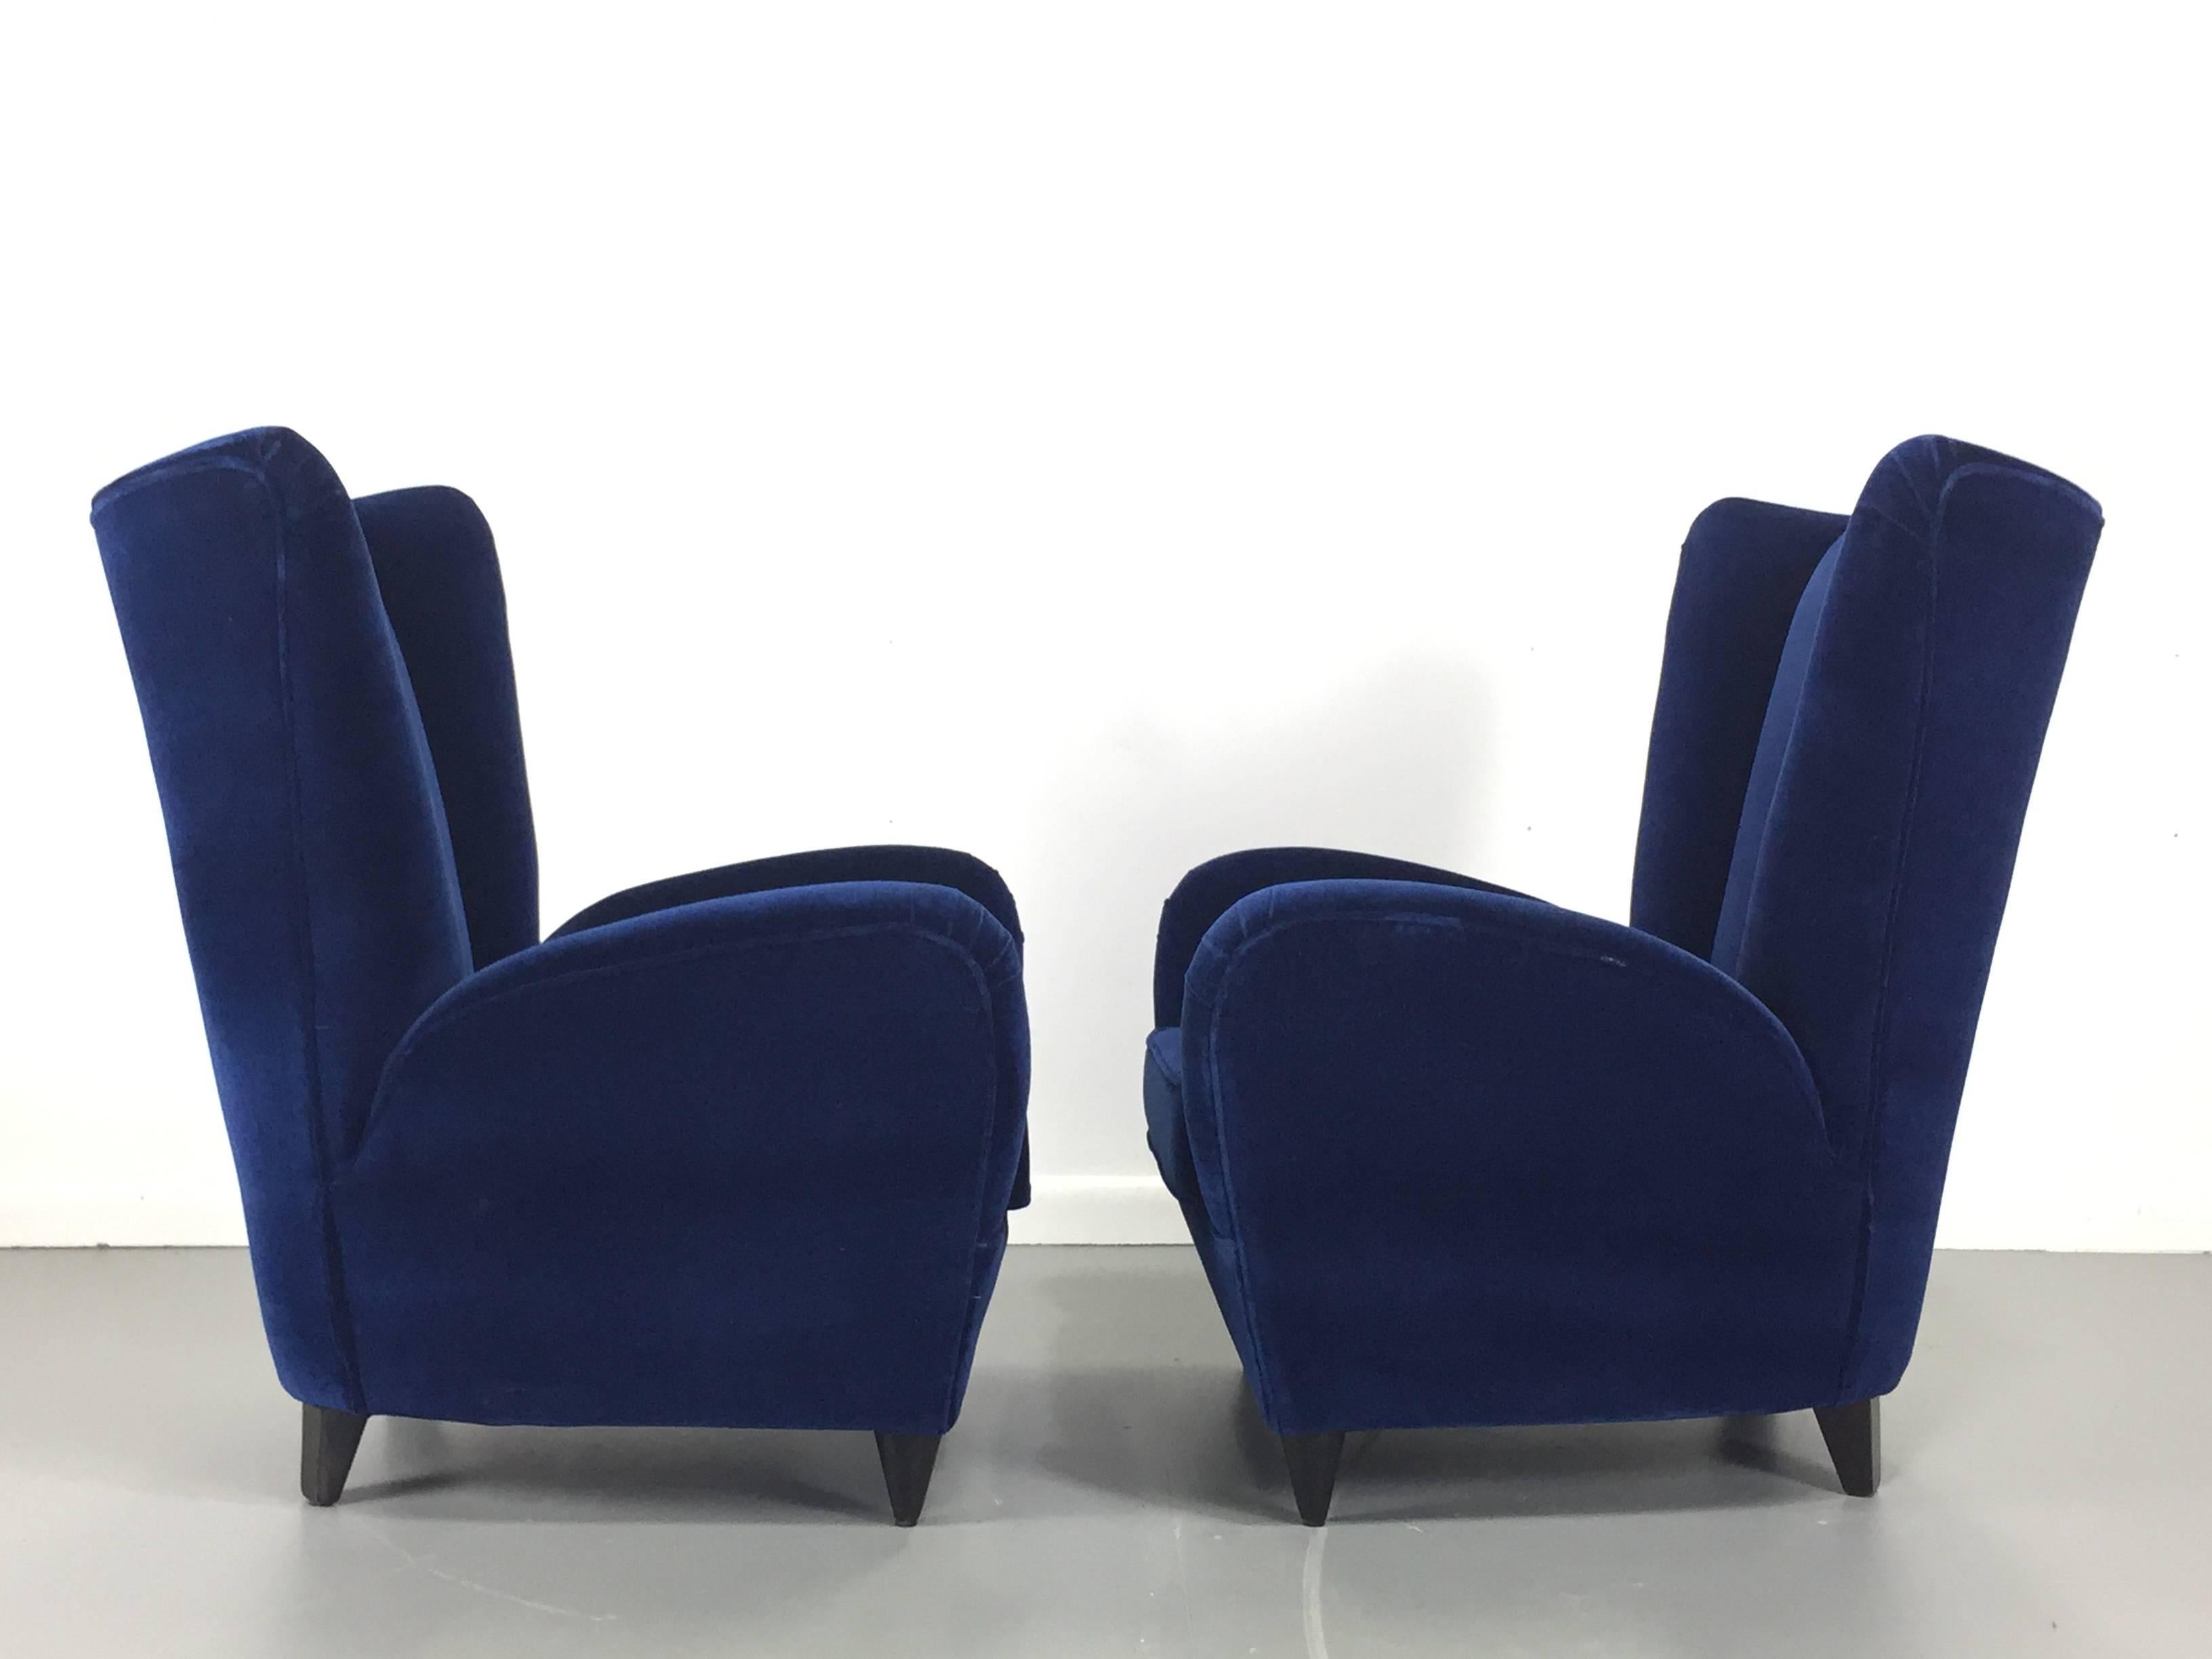 These petite lounge chairs designed by the famed Italian designer Paolo Buffa have been professionally restored in a sumptuous navy velvet. Manufactured in Italy in the 1950s these chairs give you that wonderful club chair feeling of being hugged.